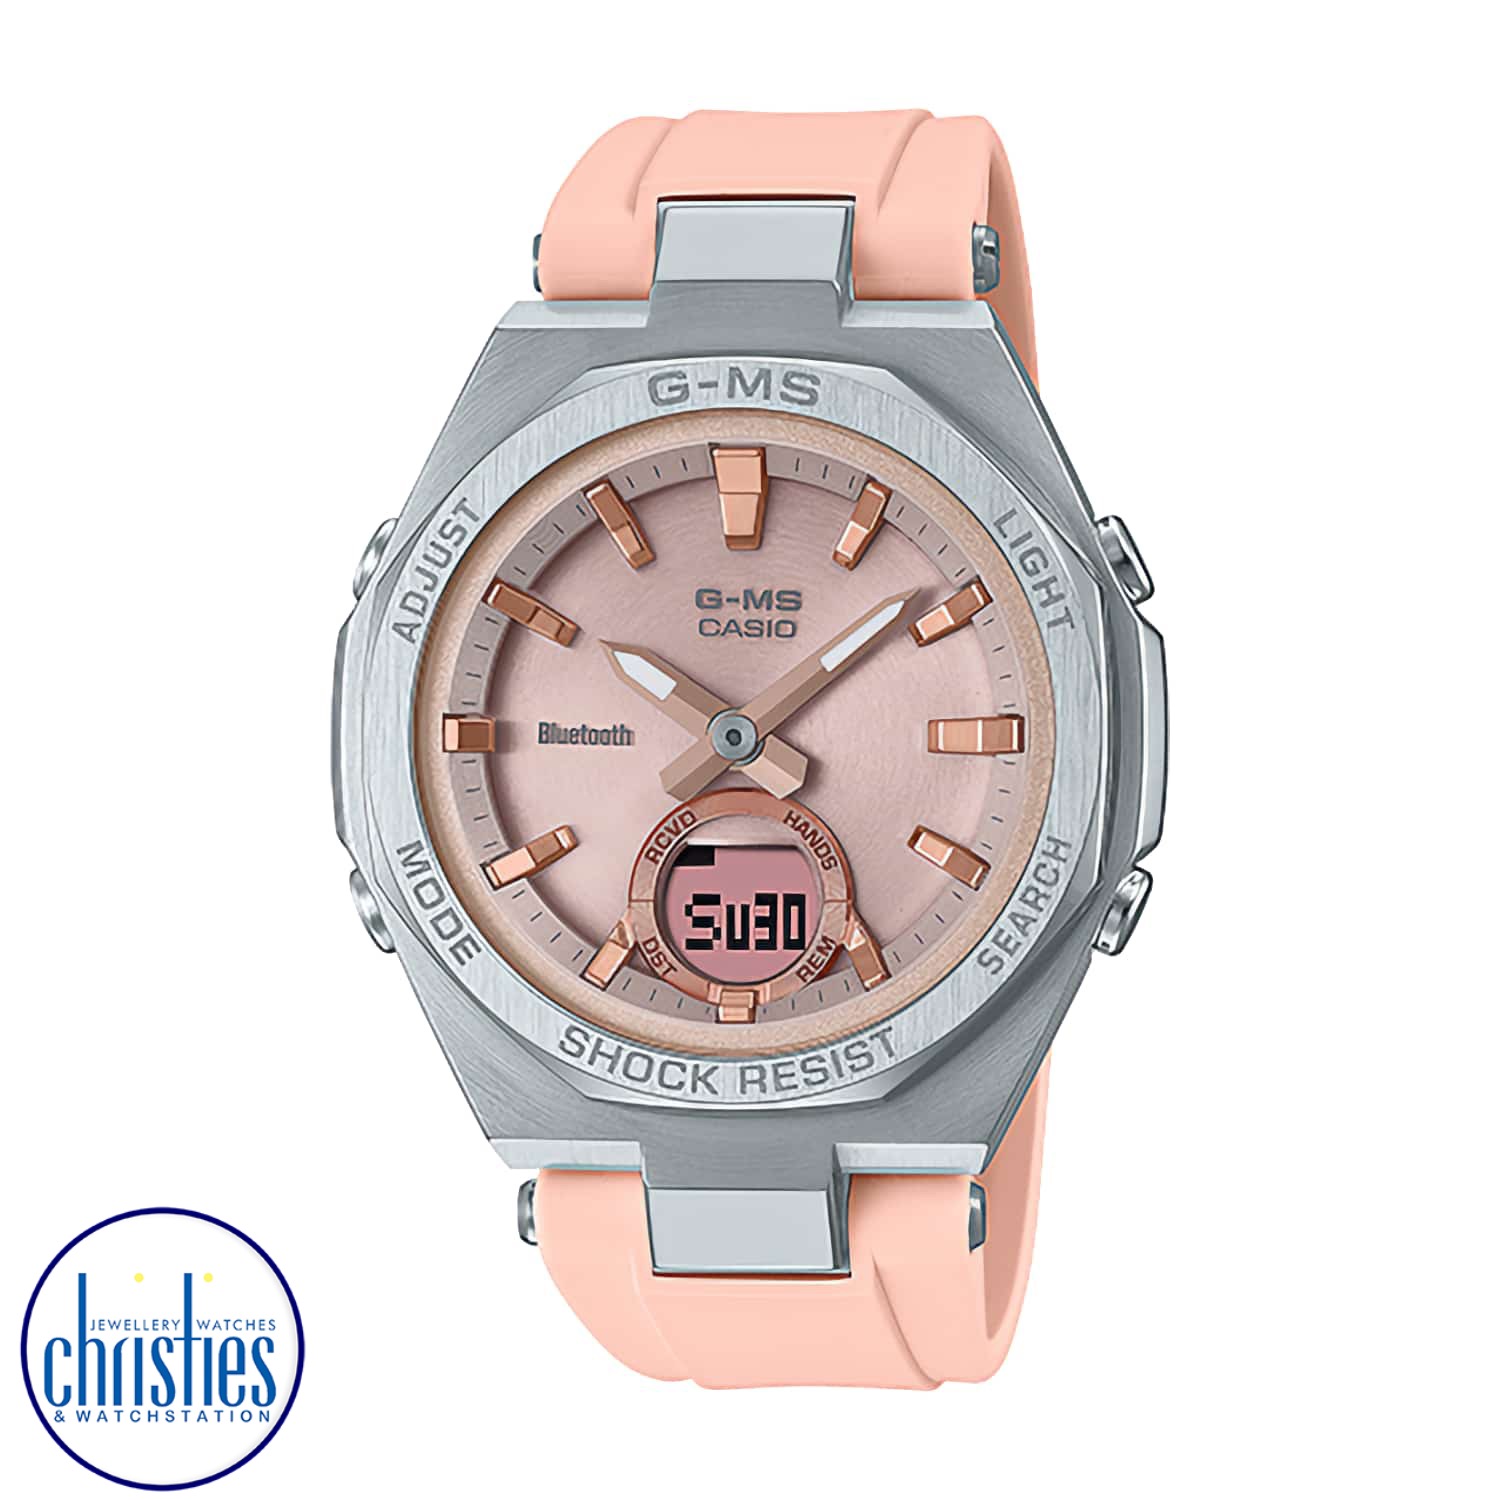 MSGB100-4A BABY-G G-MS Bluetooth Watch. Have it both ways! The practical luxury and G-SHOCK strength of the G-MS metal design meets the intuitive connectivity of the MSG-B100 line for even more convenience and smartphone-enhanced functionality. Just pair 